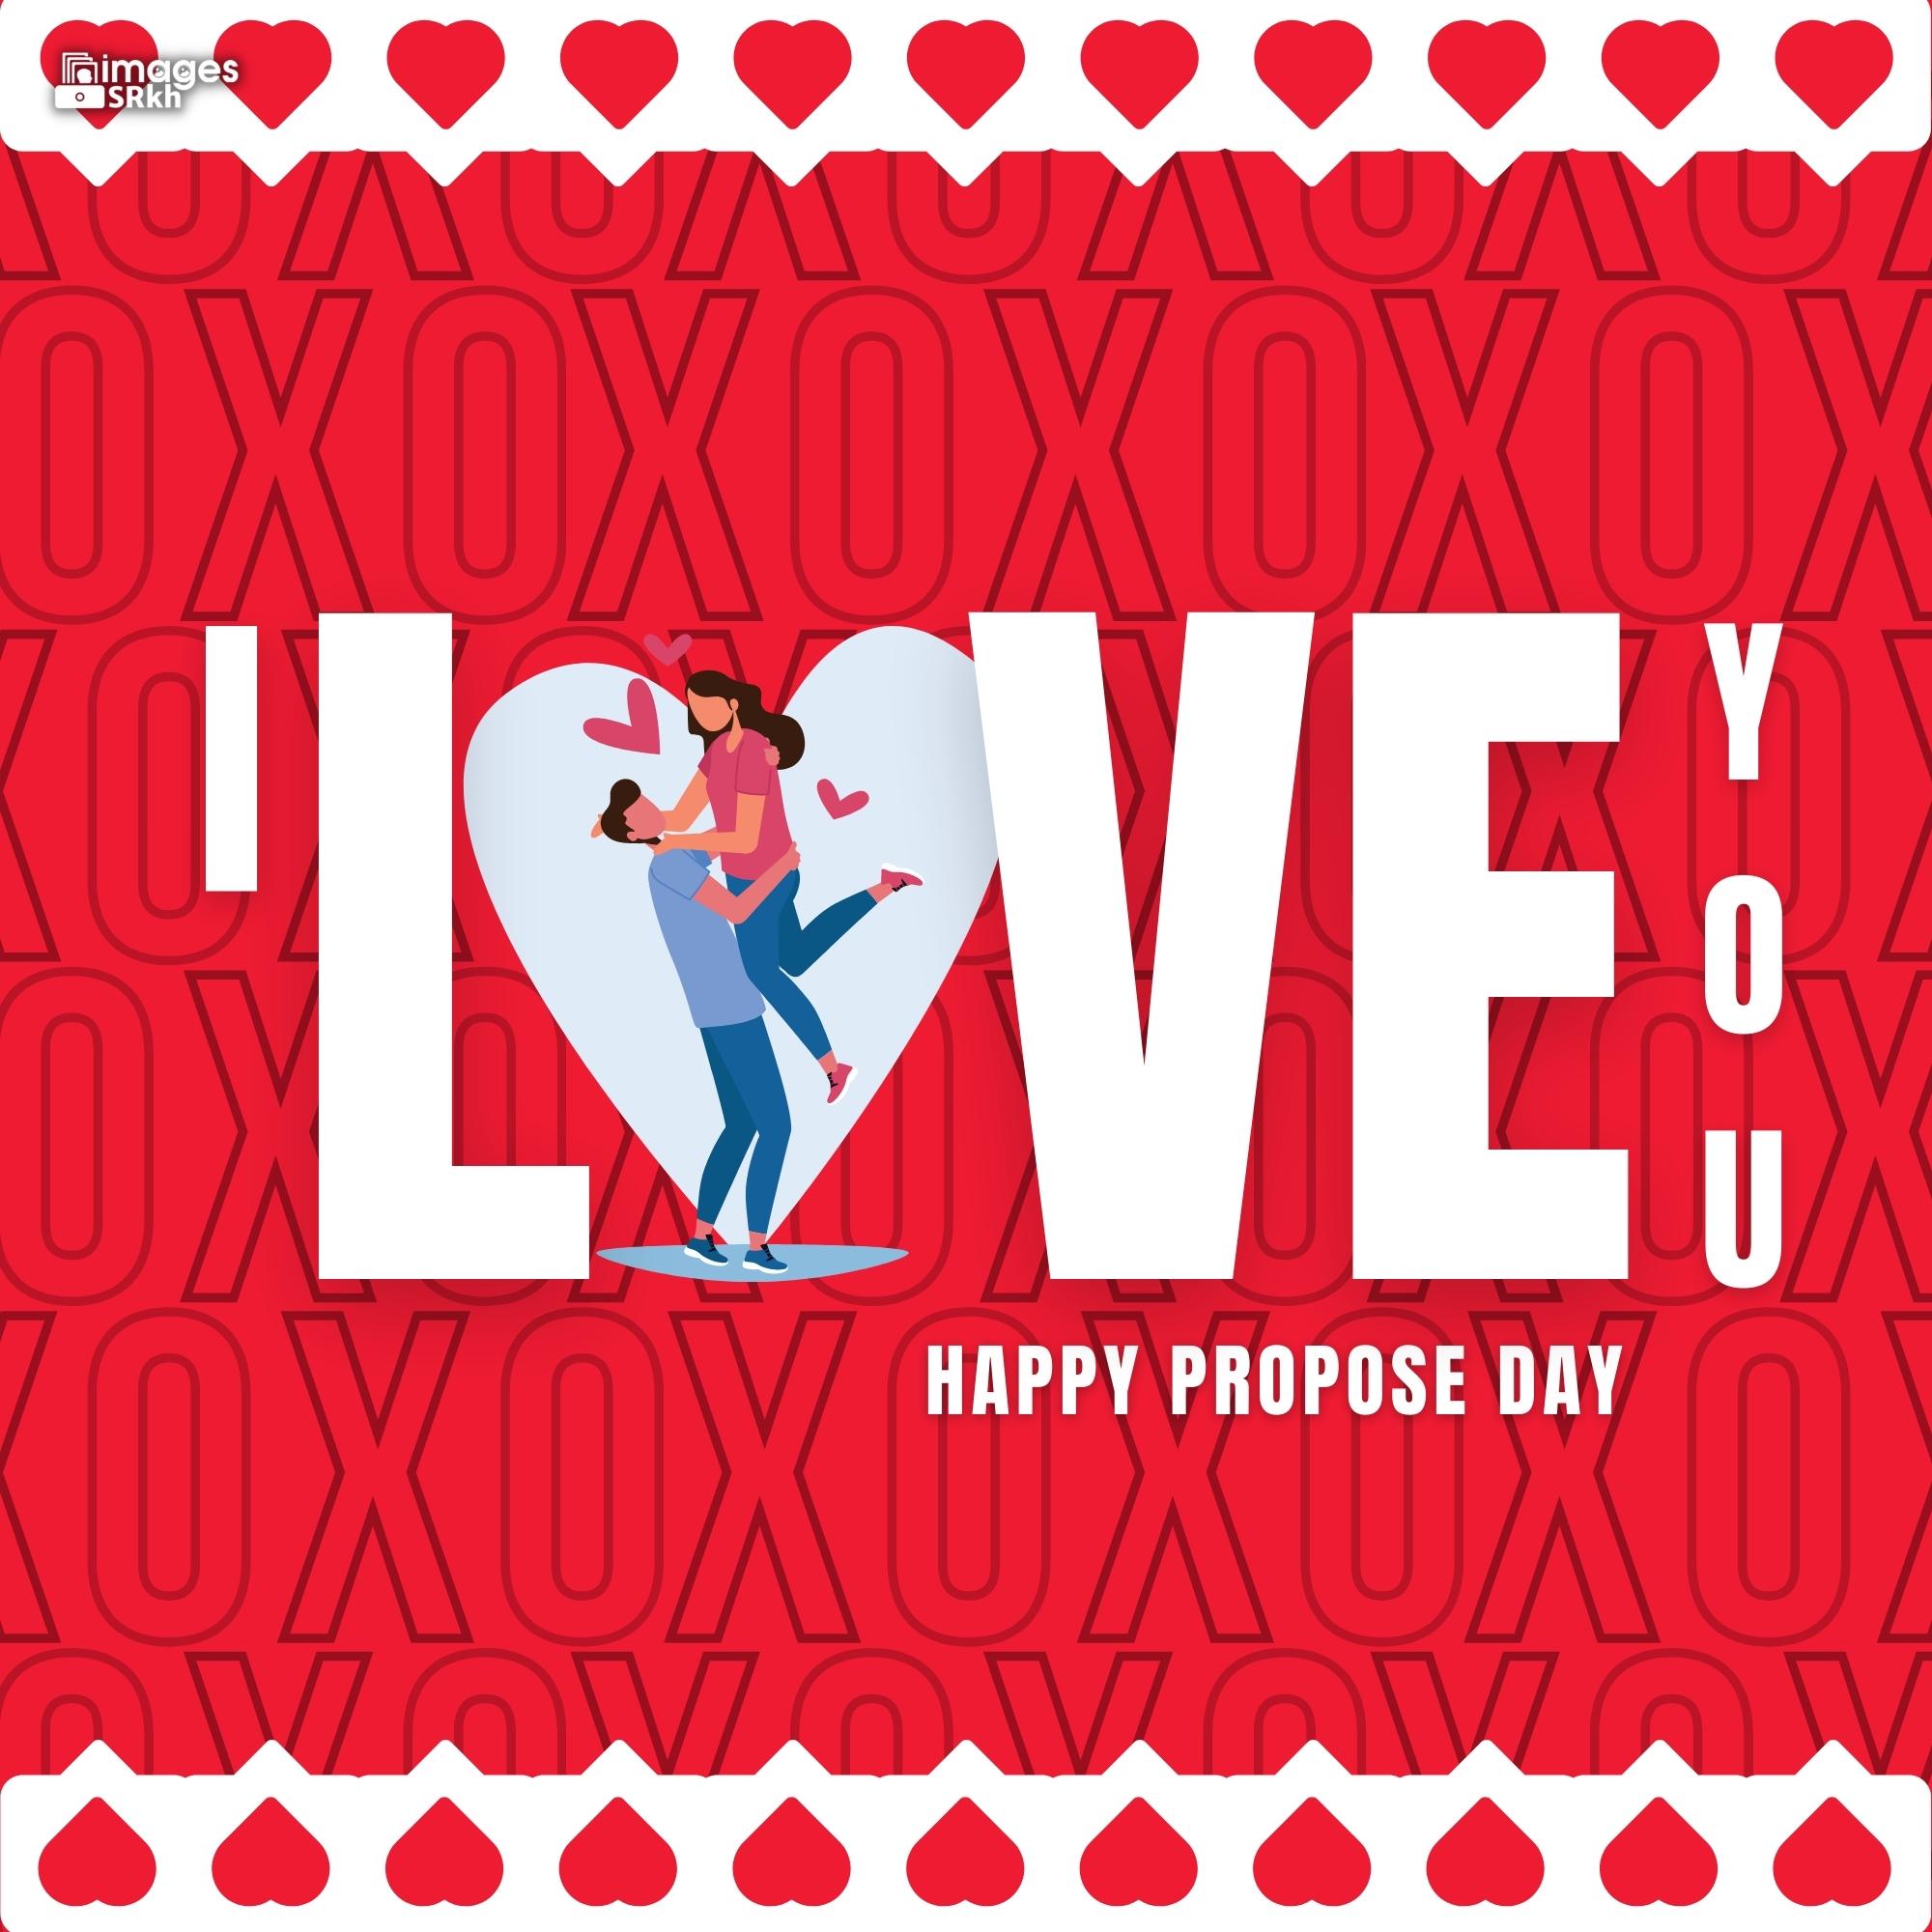 Happy Propose Day Images | 397 | I LOVE YOU